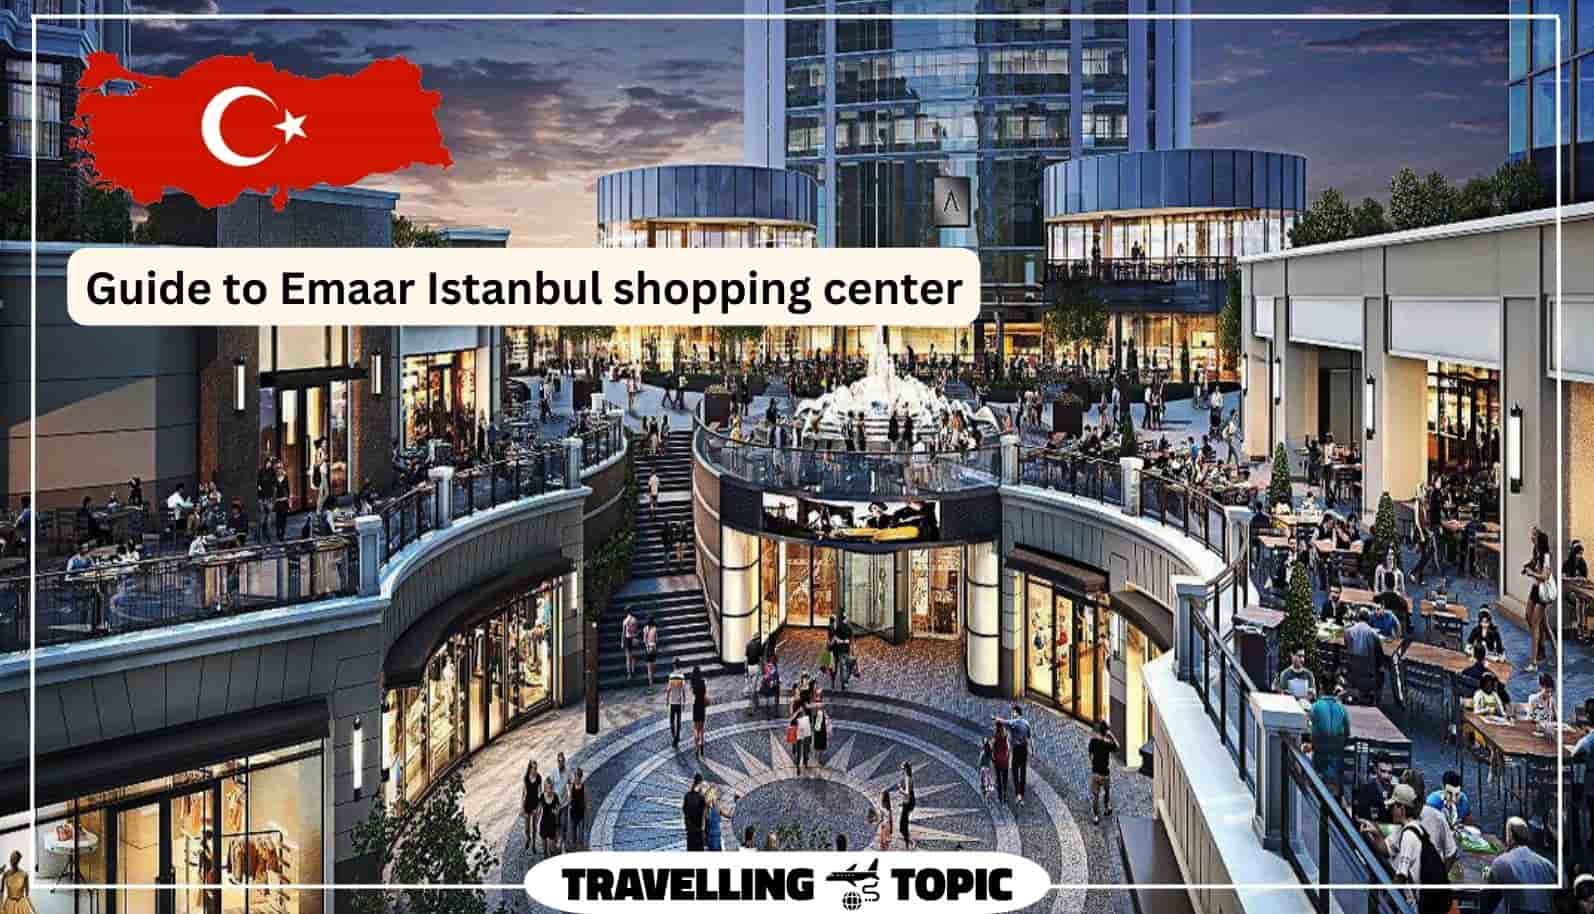 Guide to Emaar Istanbul shopping center